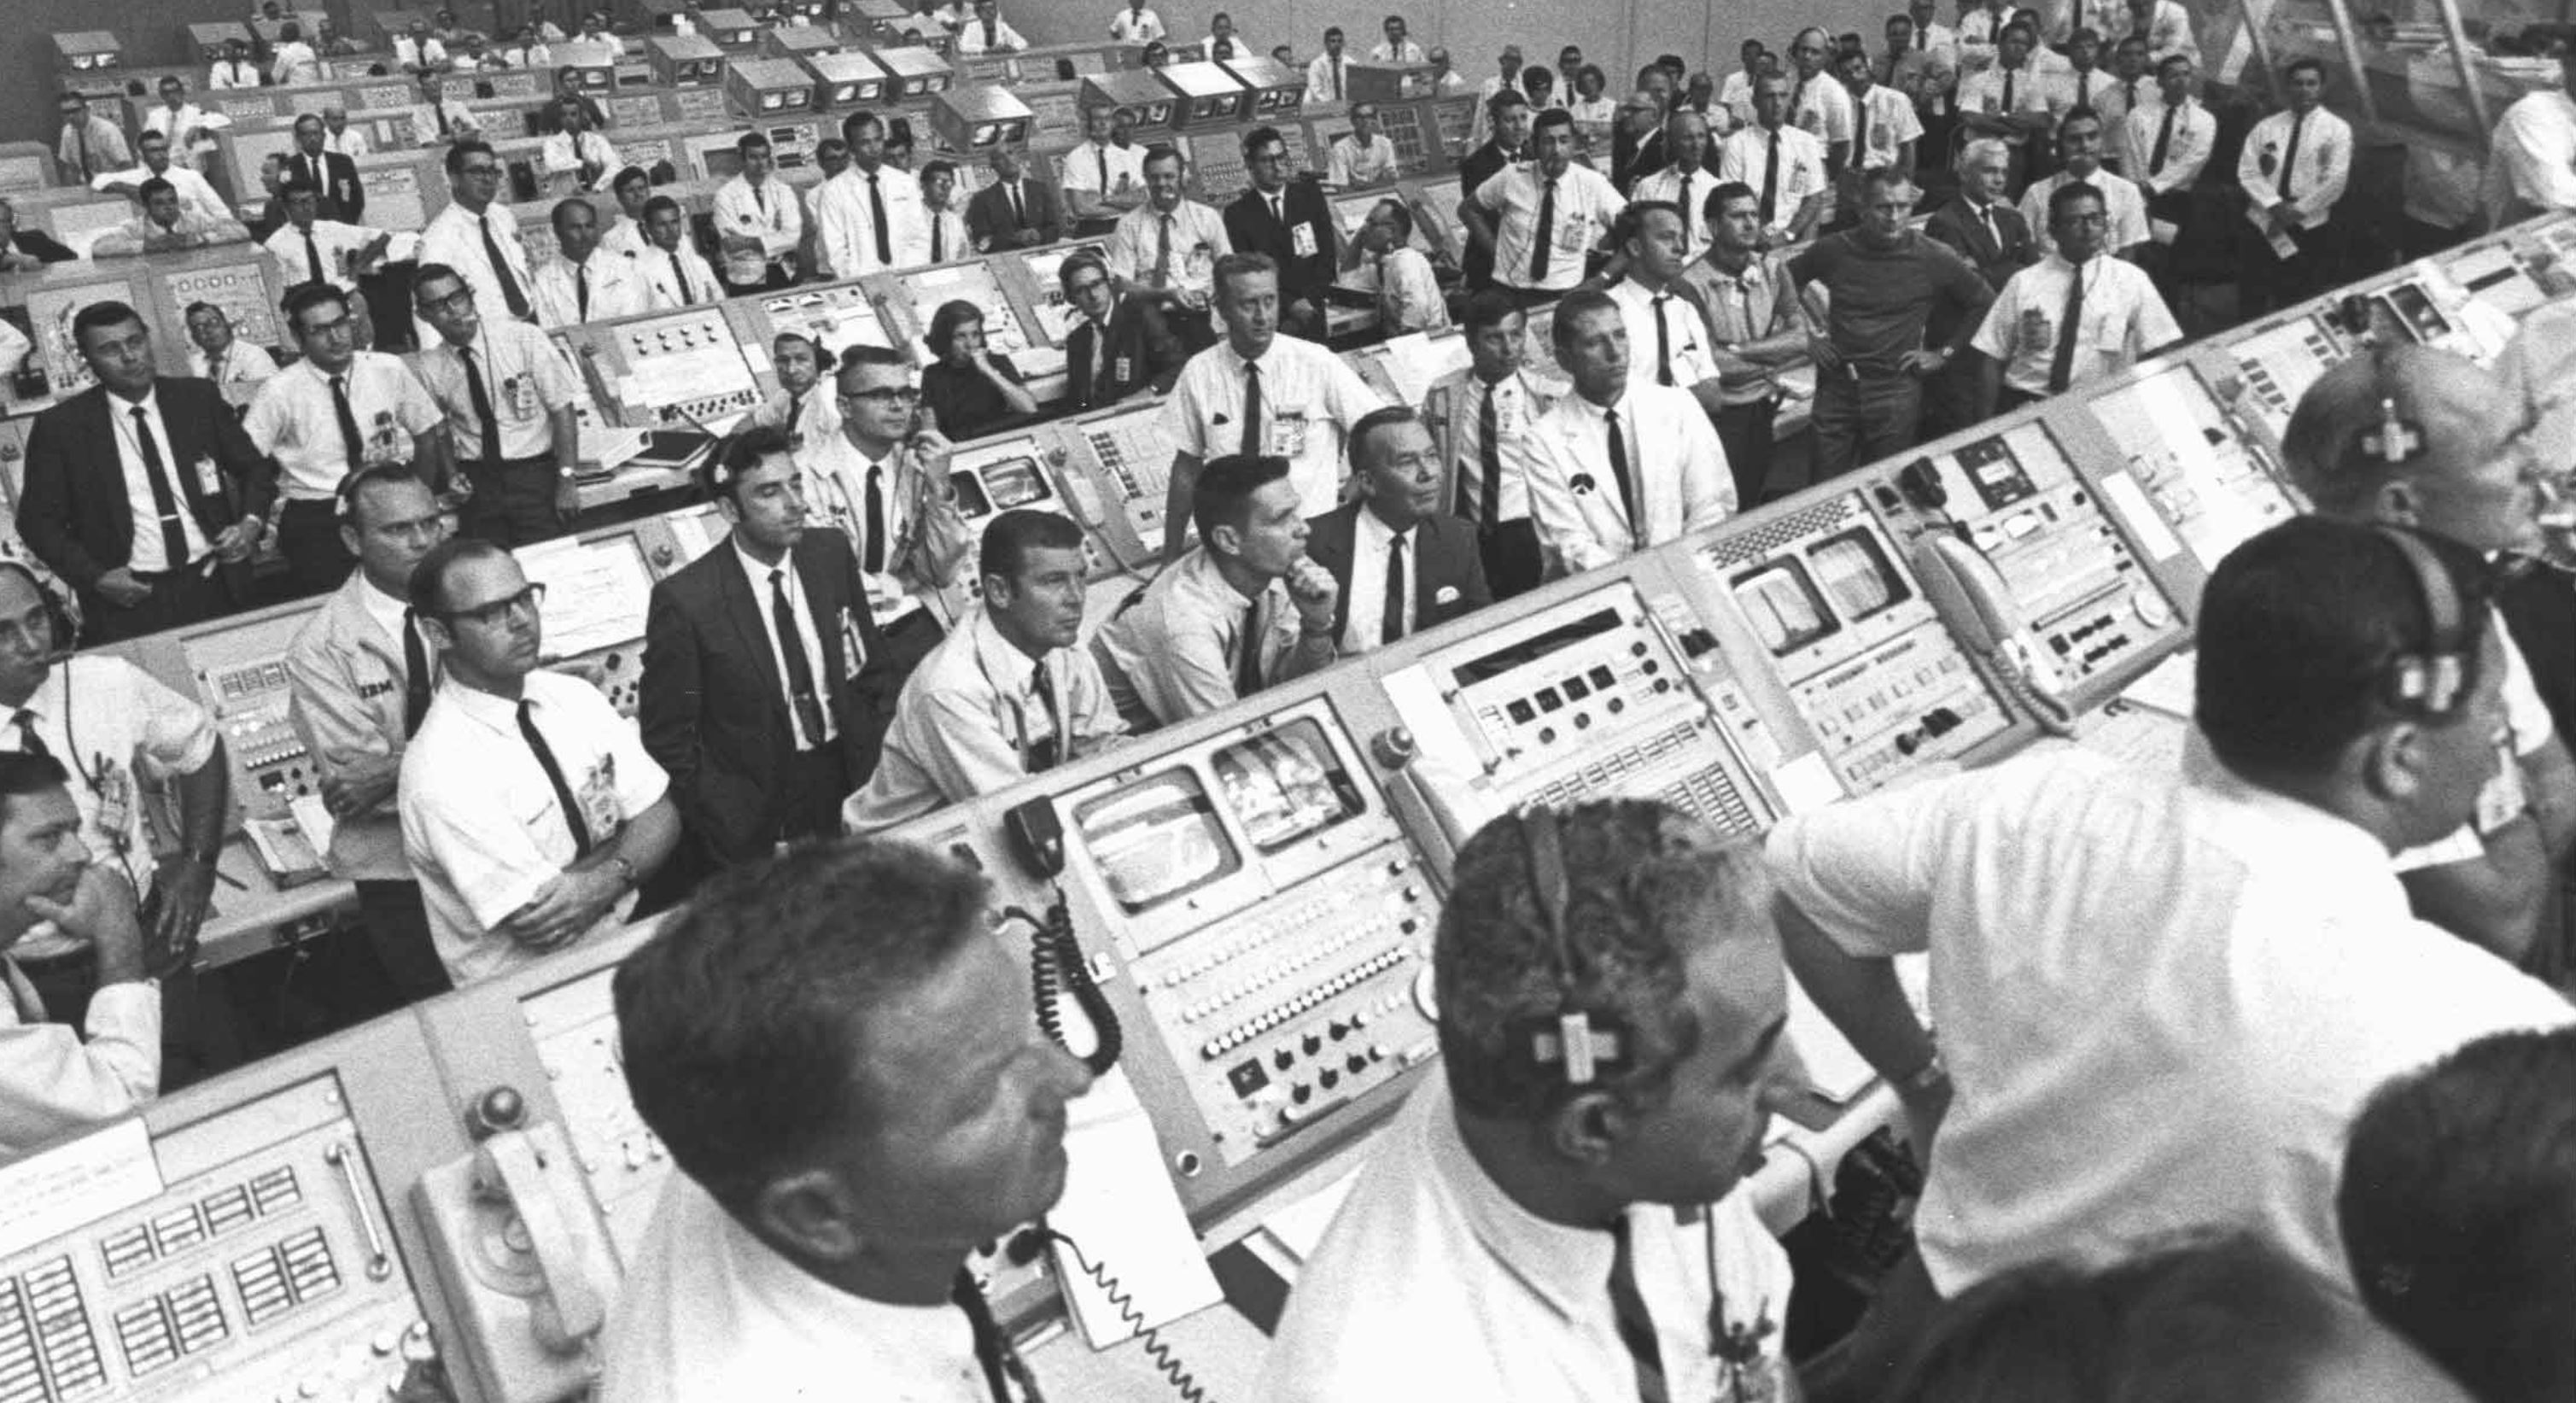 Up close, Personal reflections on space pioneers